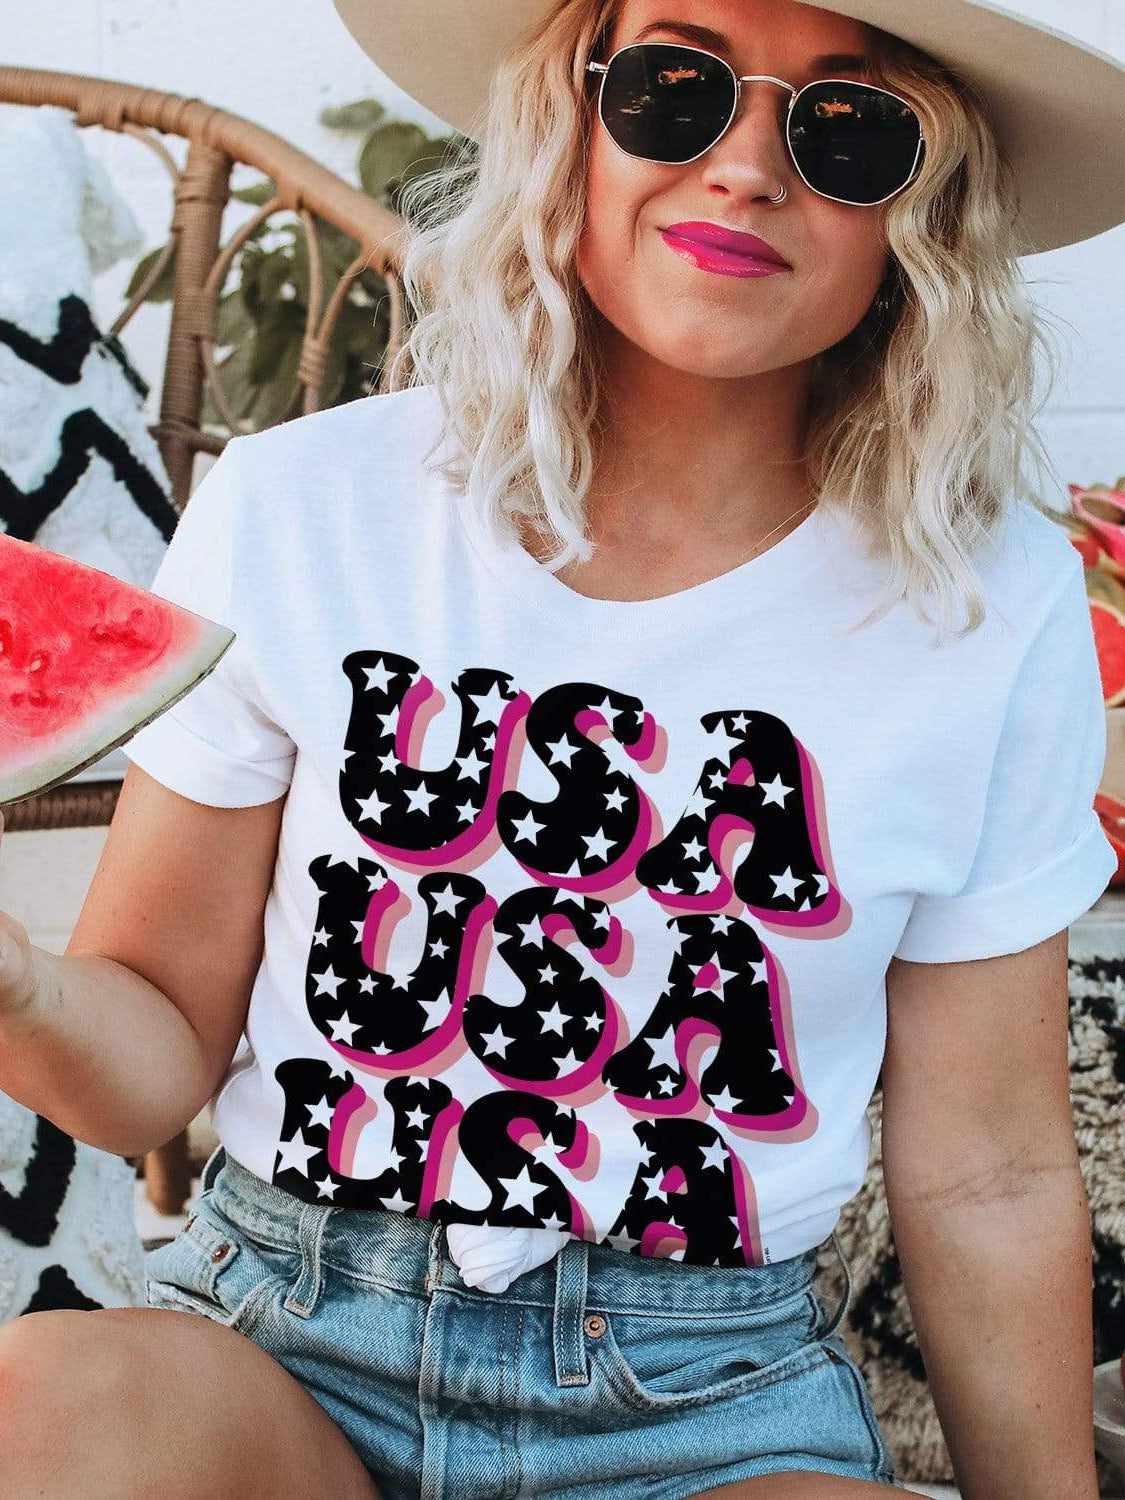 USA t-shirt. Patriotic tees for Fourth of July.